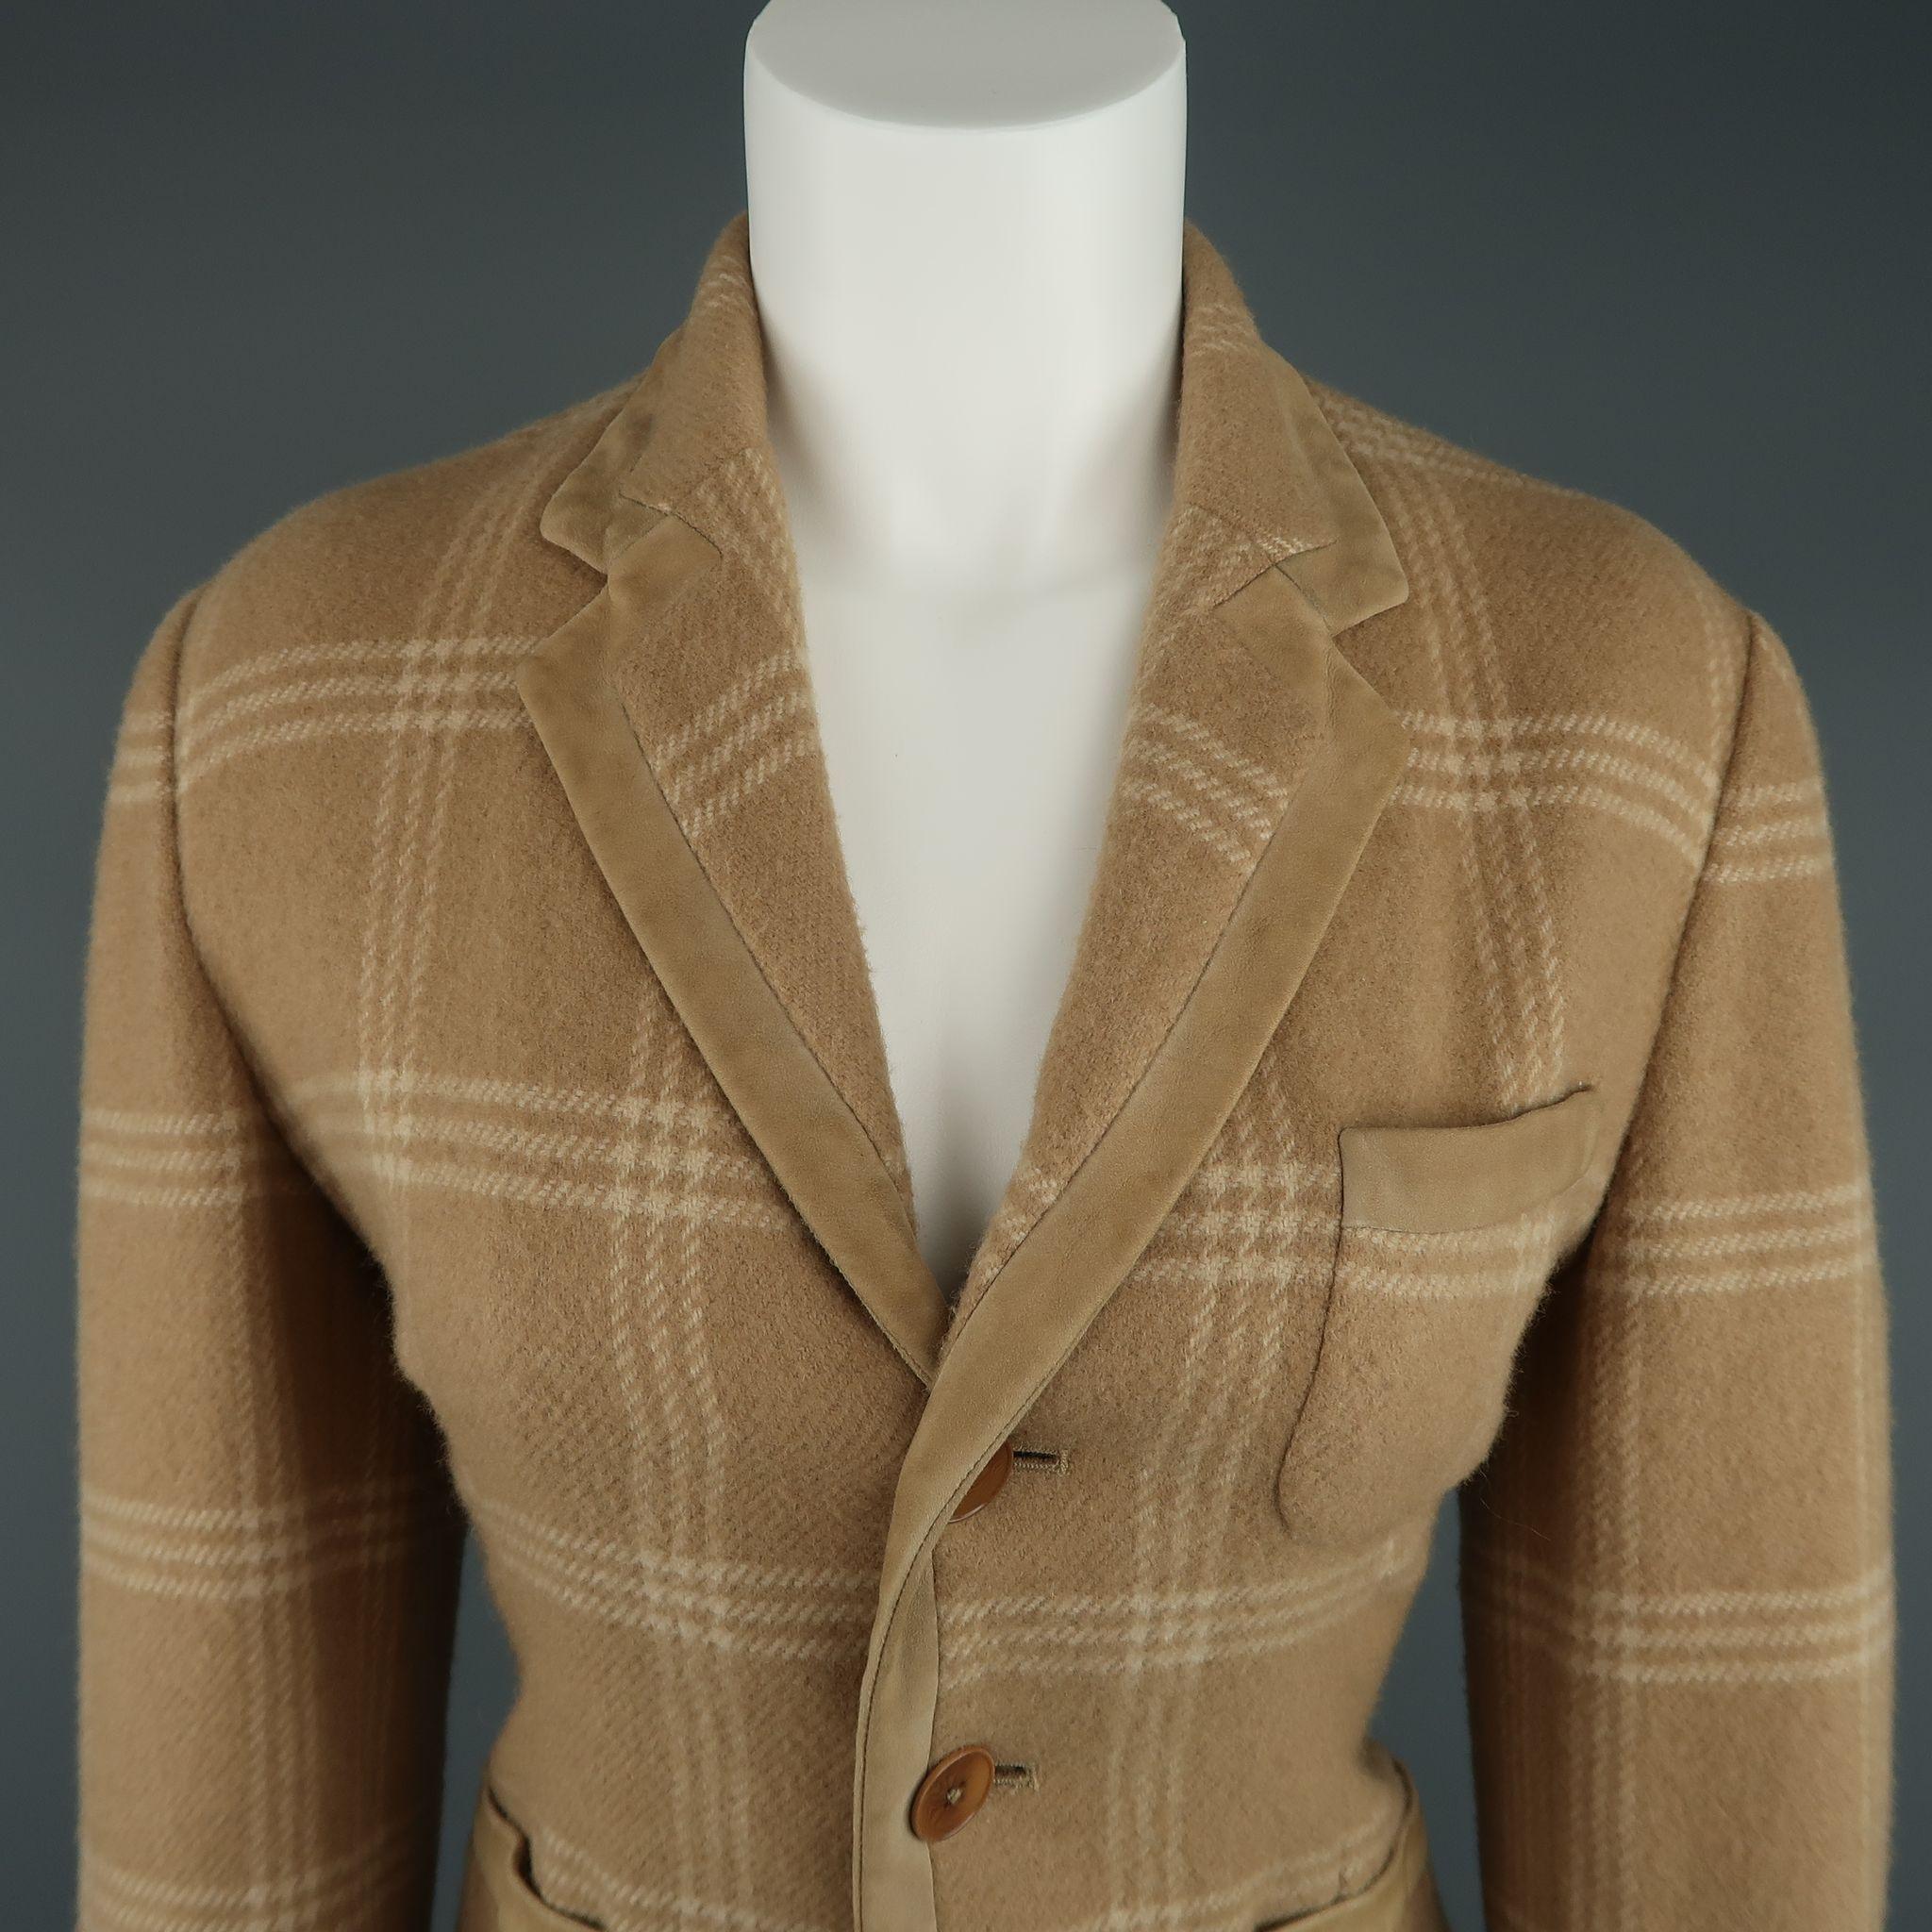 RALPH LAUREN COLLECTION jacket comes in a camel and beige plaid wool and features a notch lapel, three button closure, and thick suede piping details throughout. Wear throughout suede. Made in USA.

Very Good Pre-Owned Condition.
Marked: US